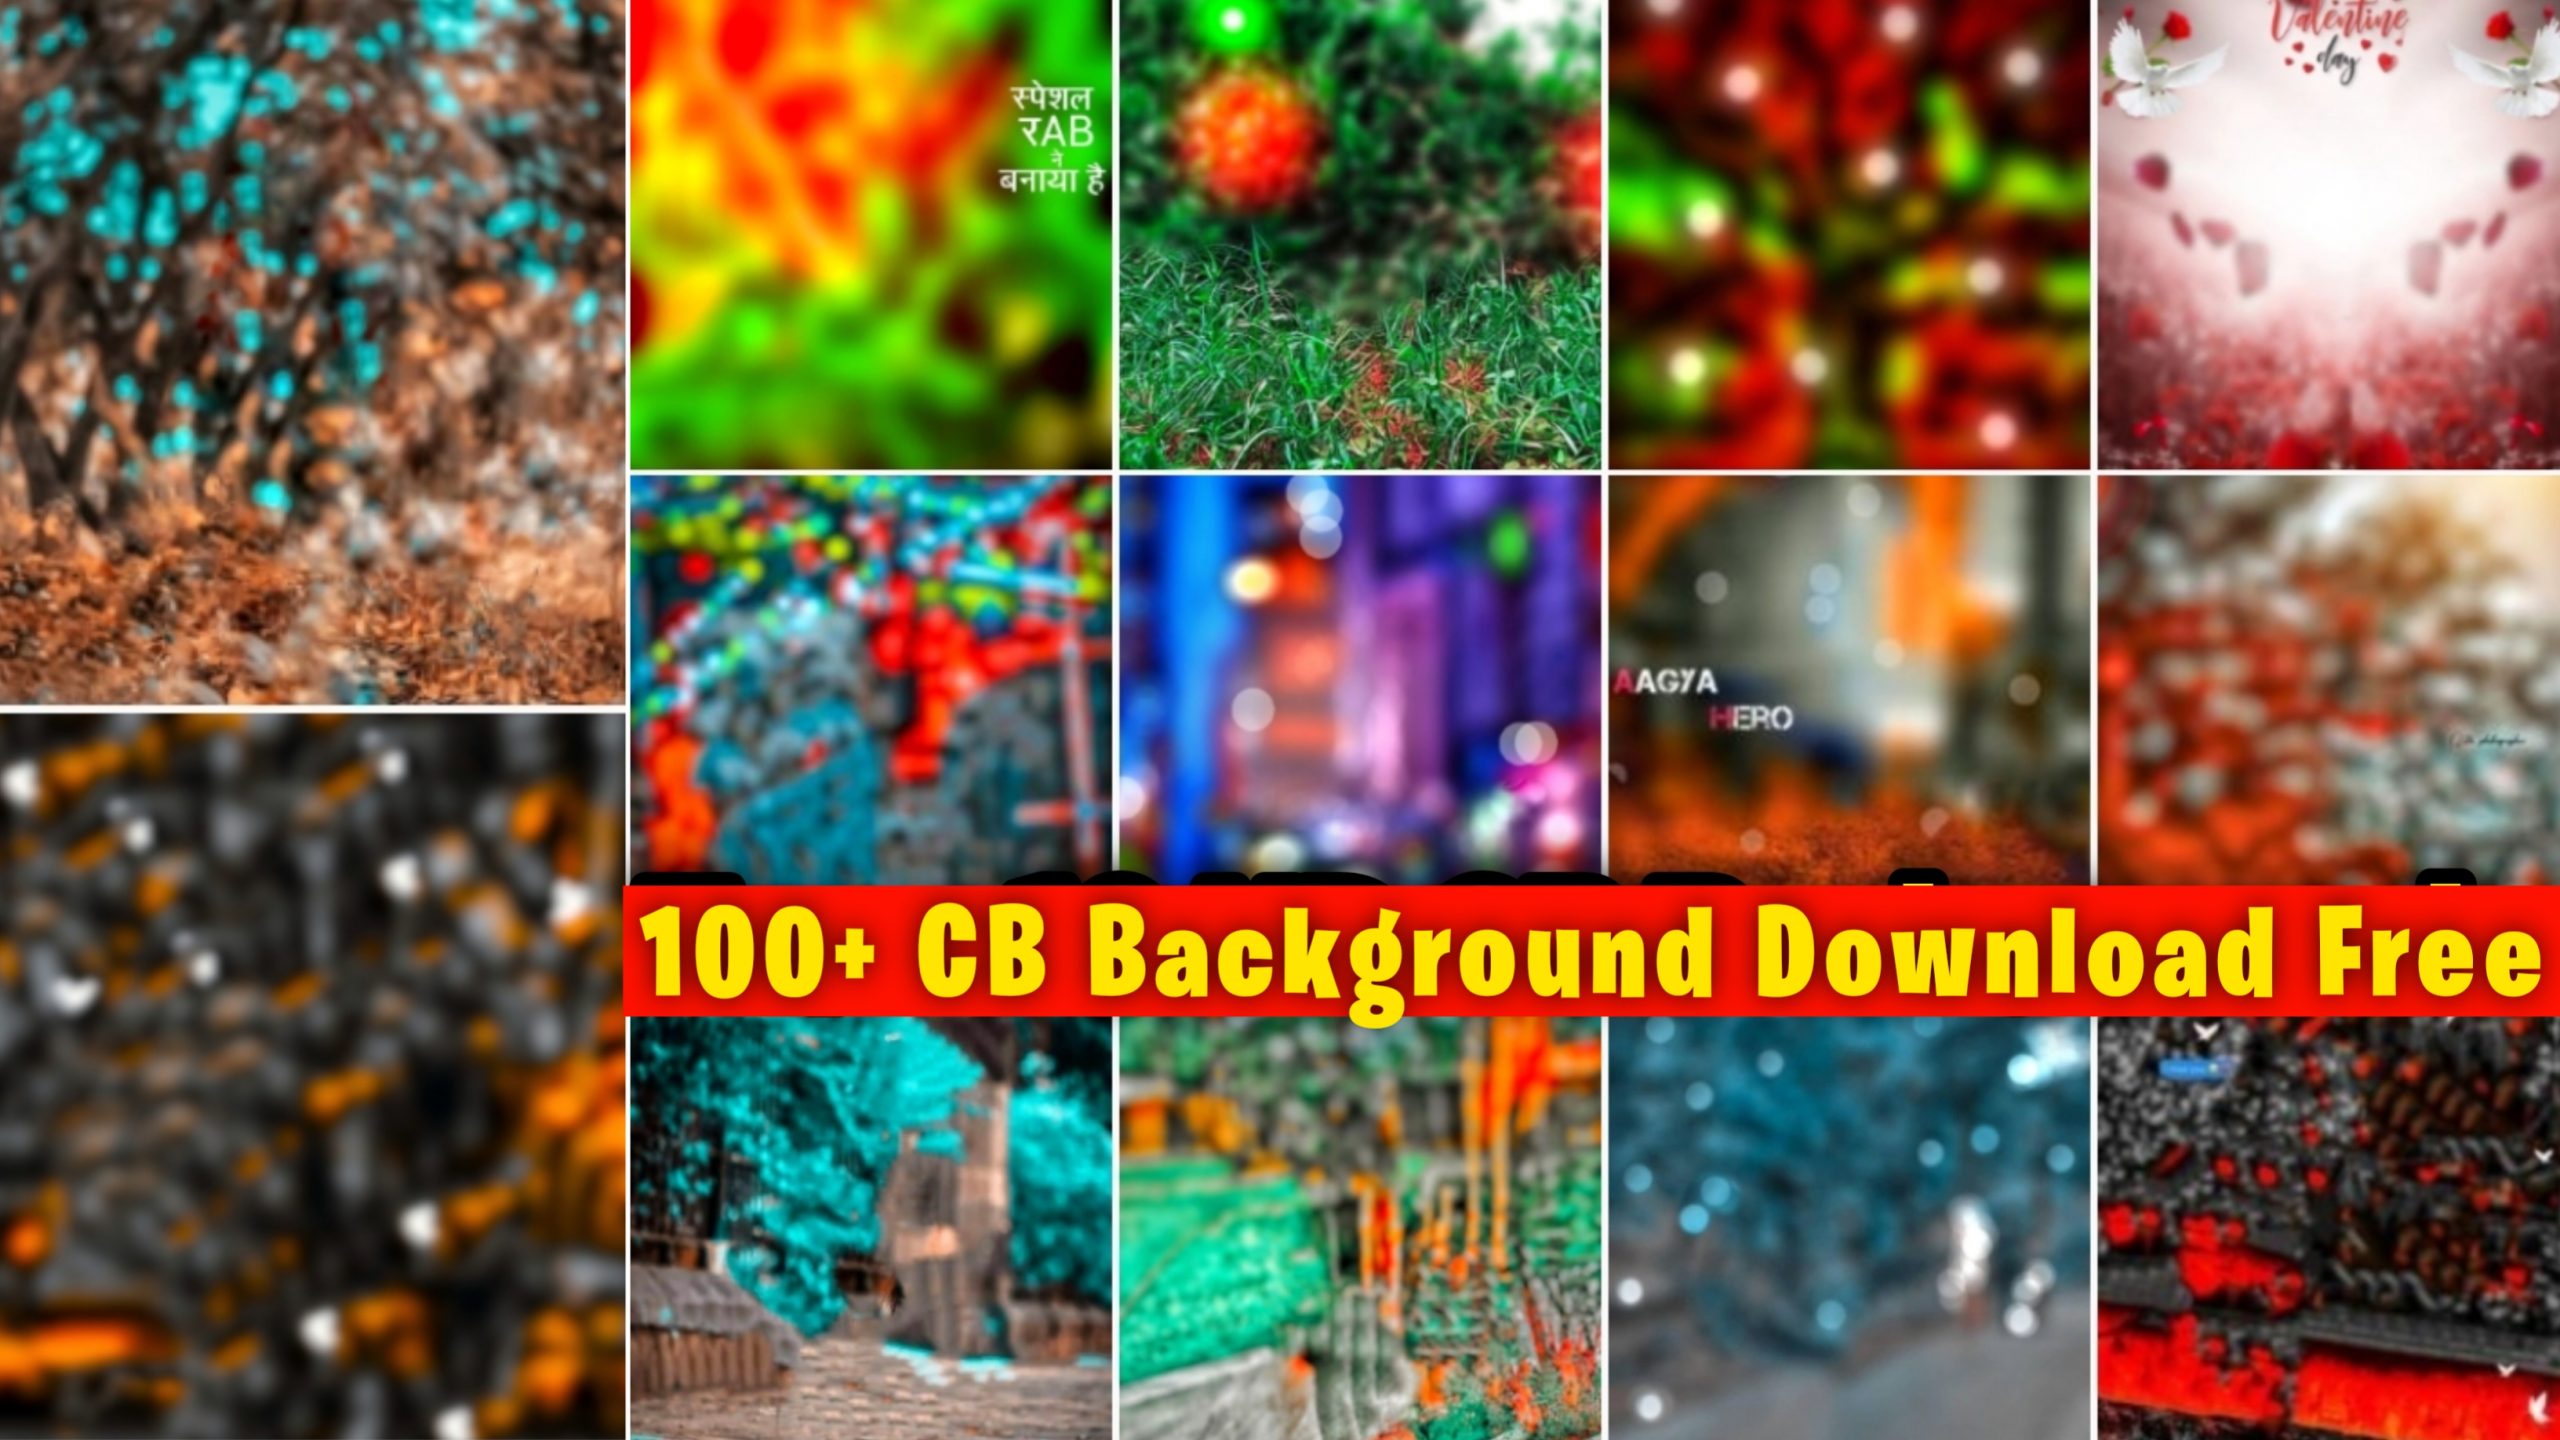  King CB Background HD Background For Editing  2022 Full Hd Background